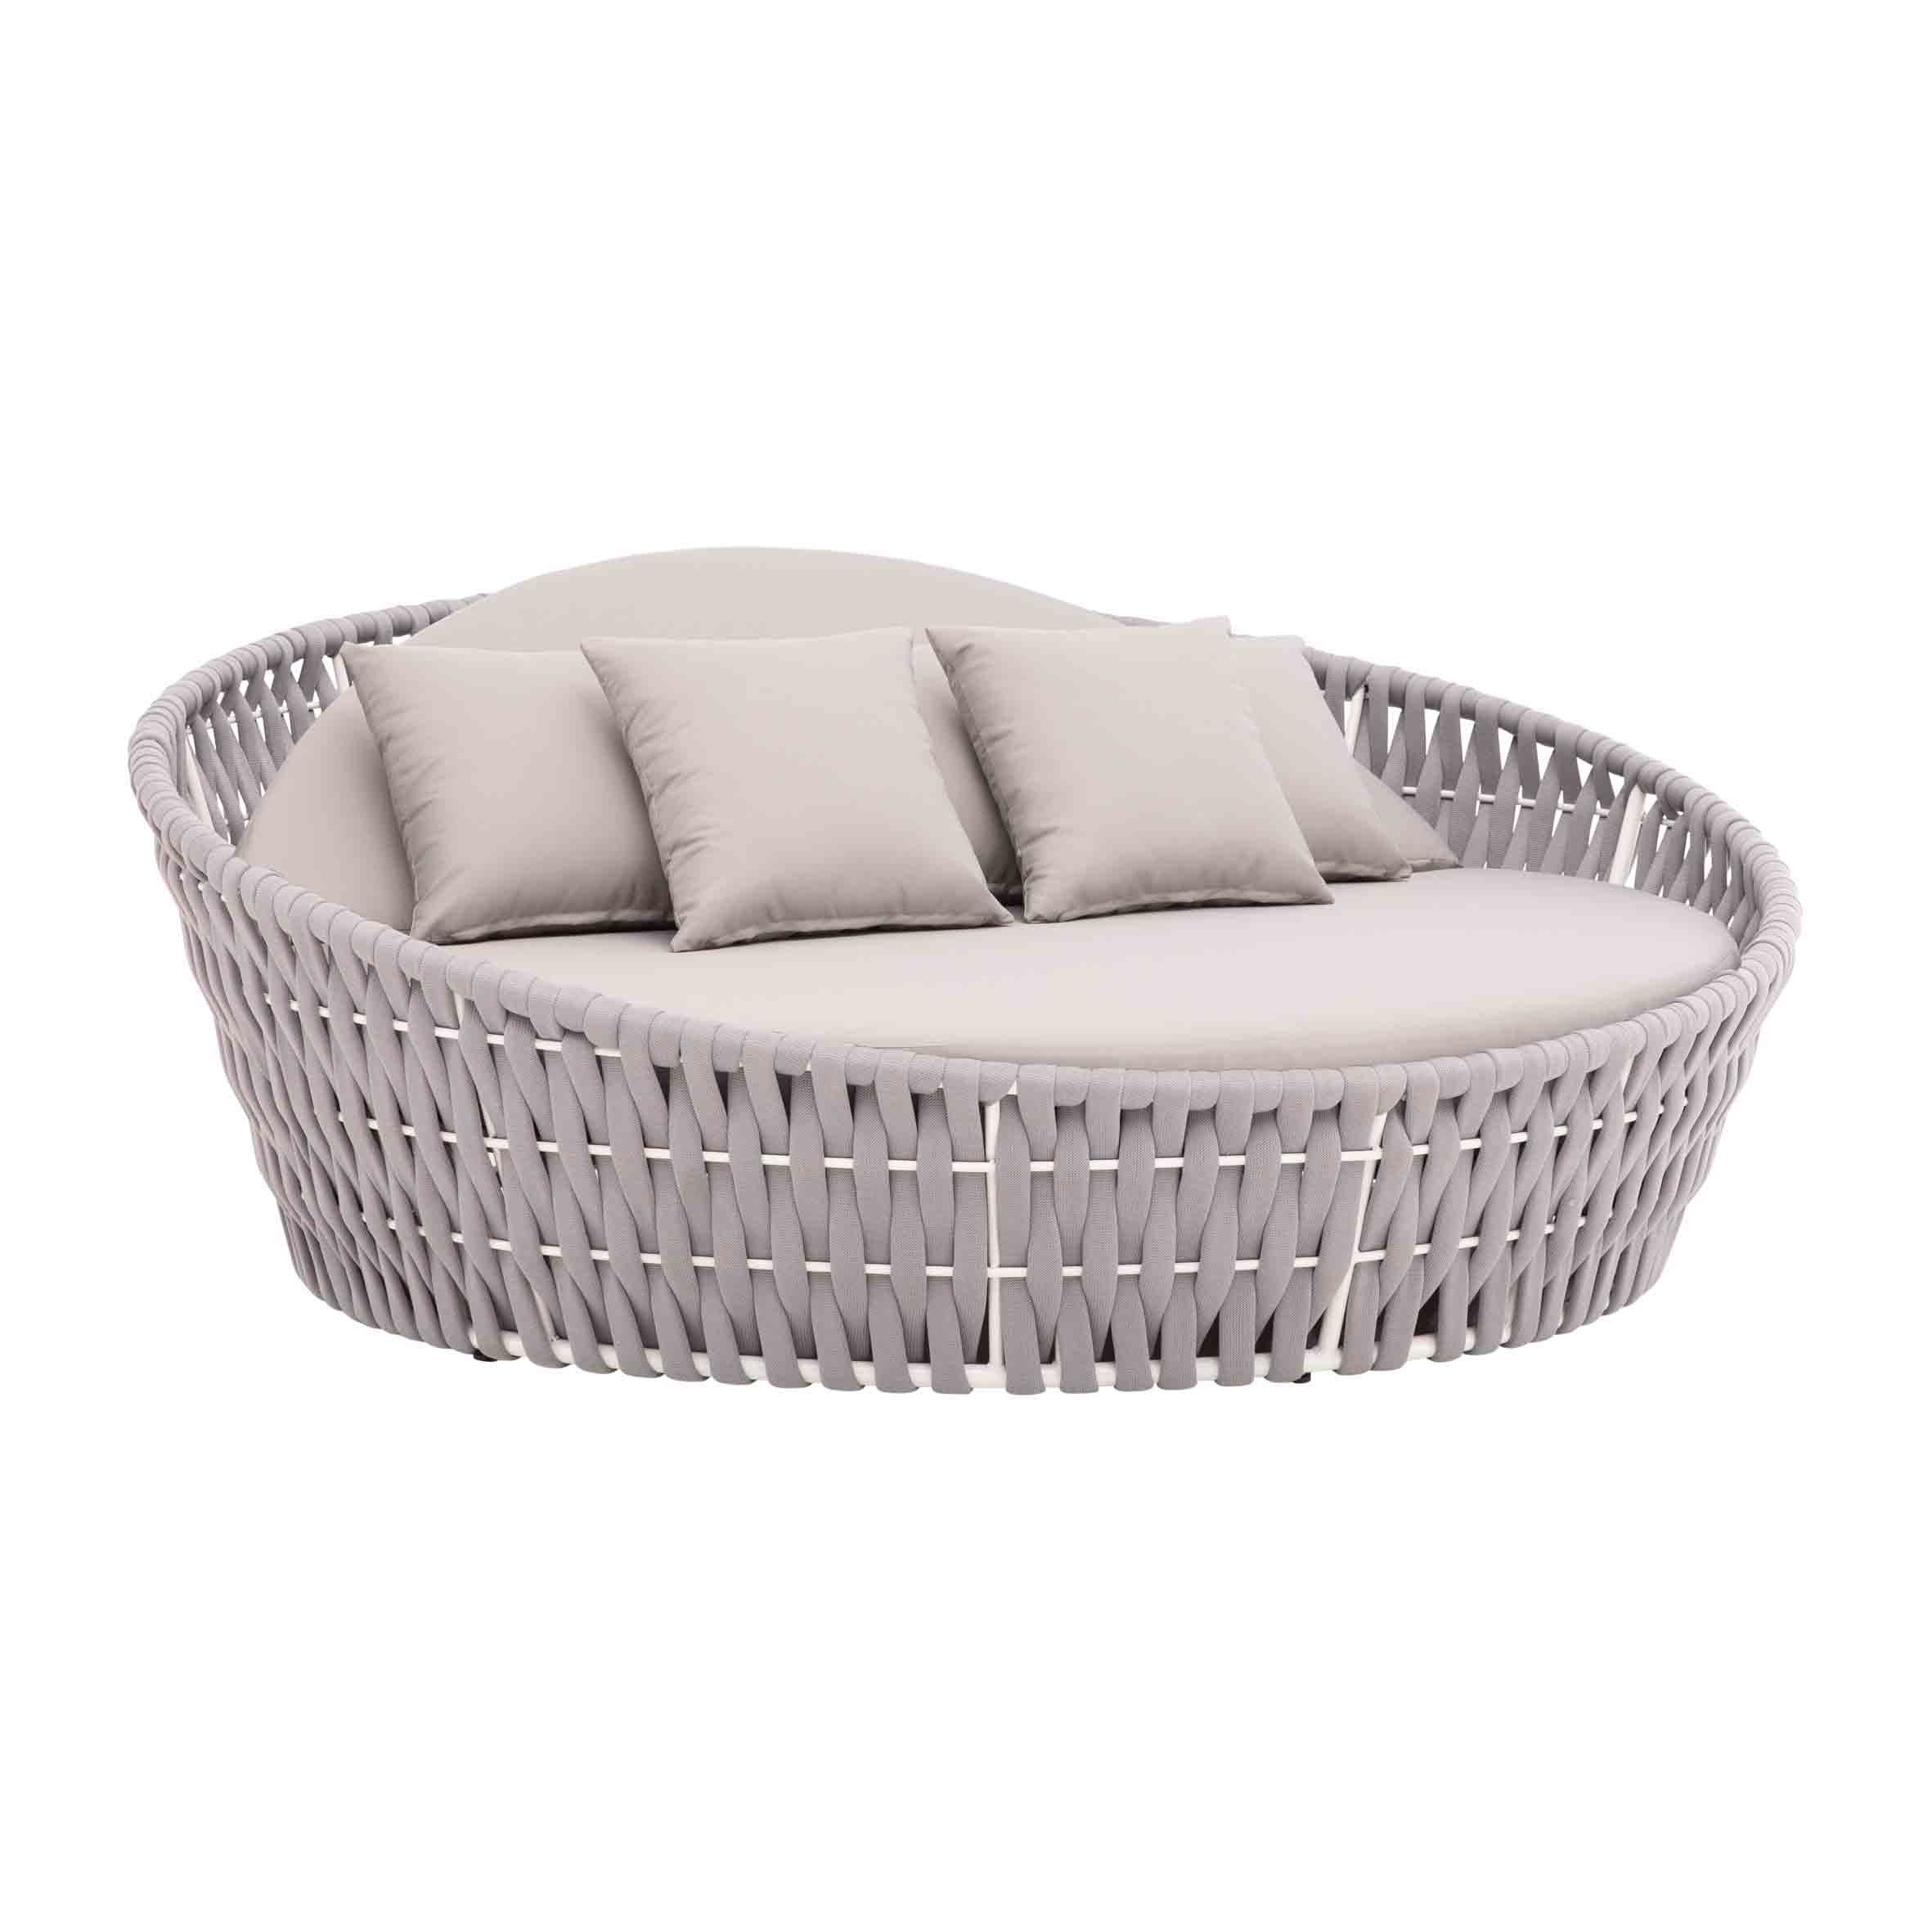 Art rope round daybed S5